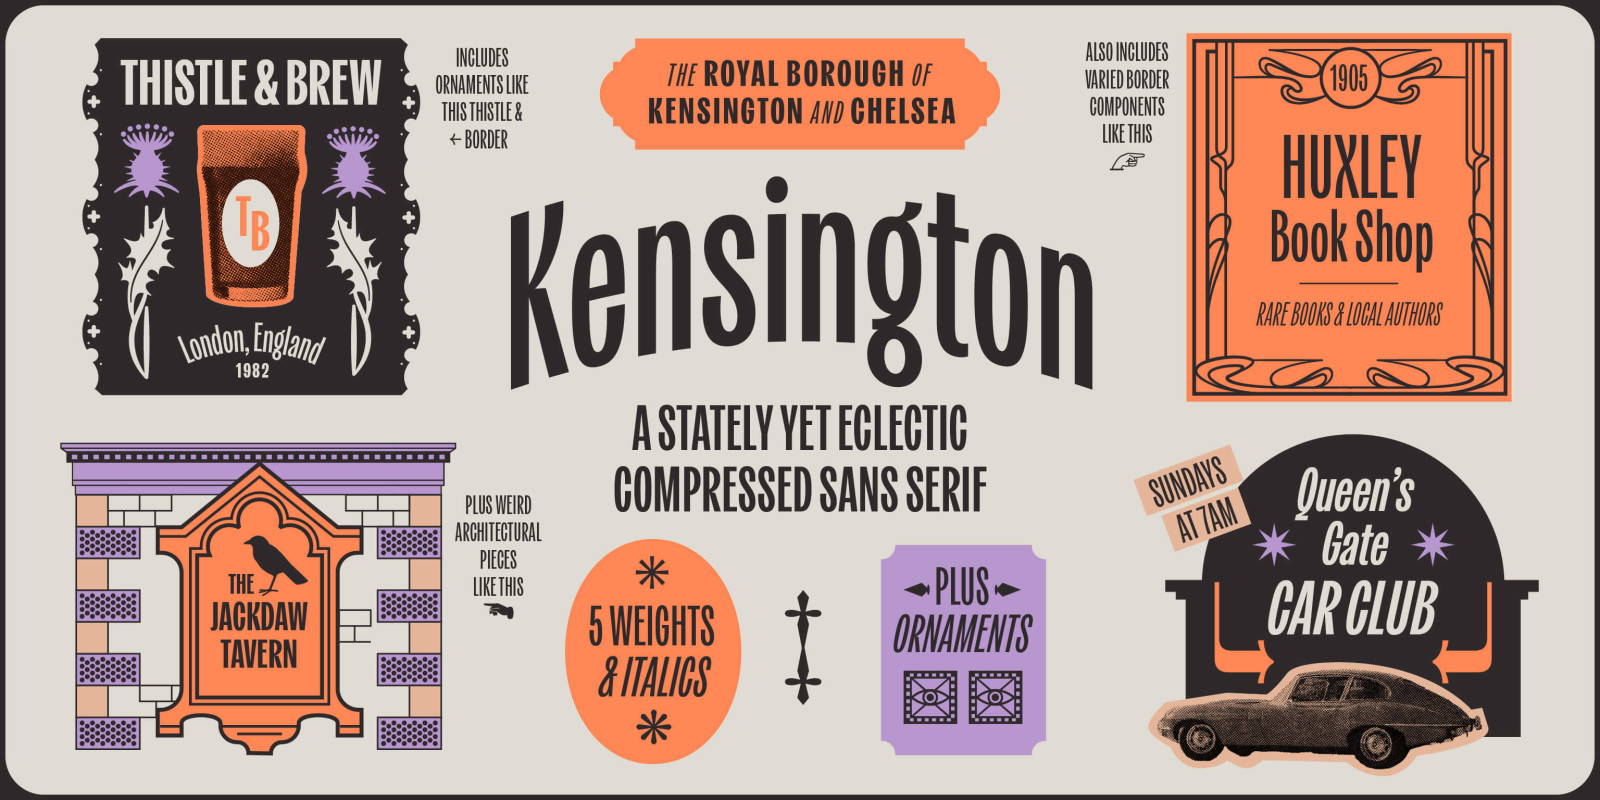 Kensington, a stately yet eclectic compressed sans serif by Jen Hood.